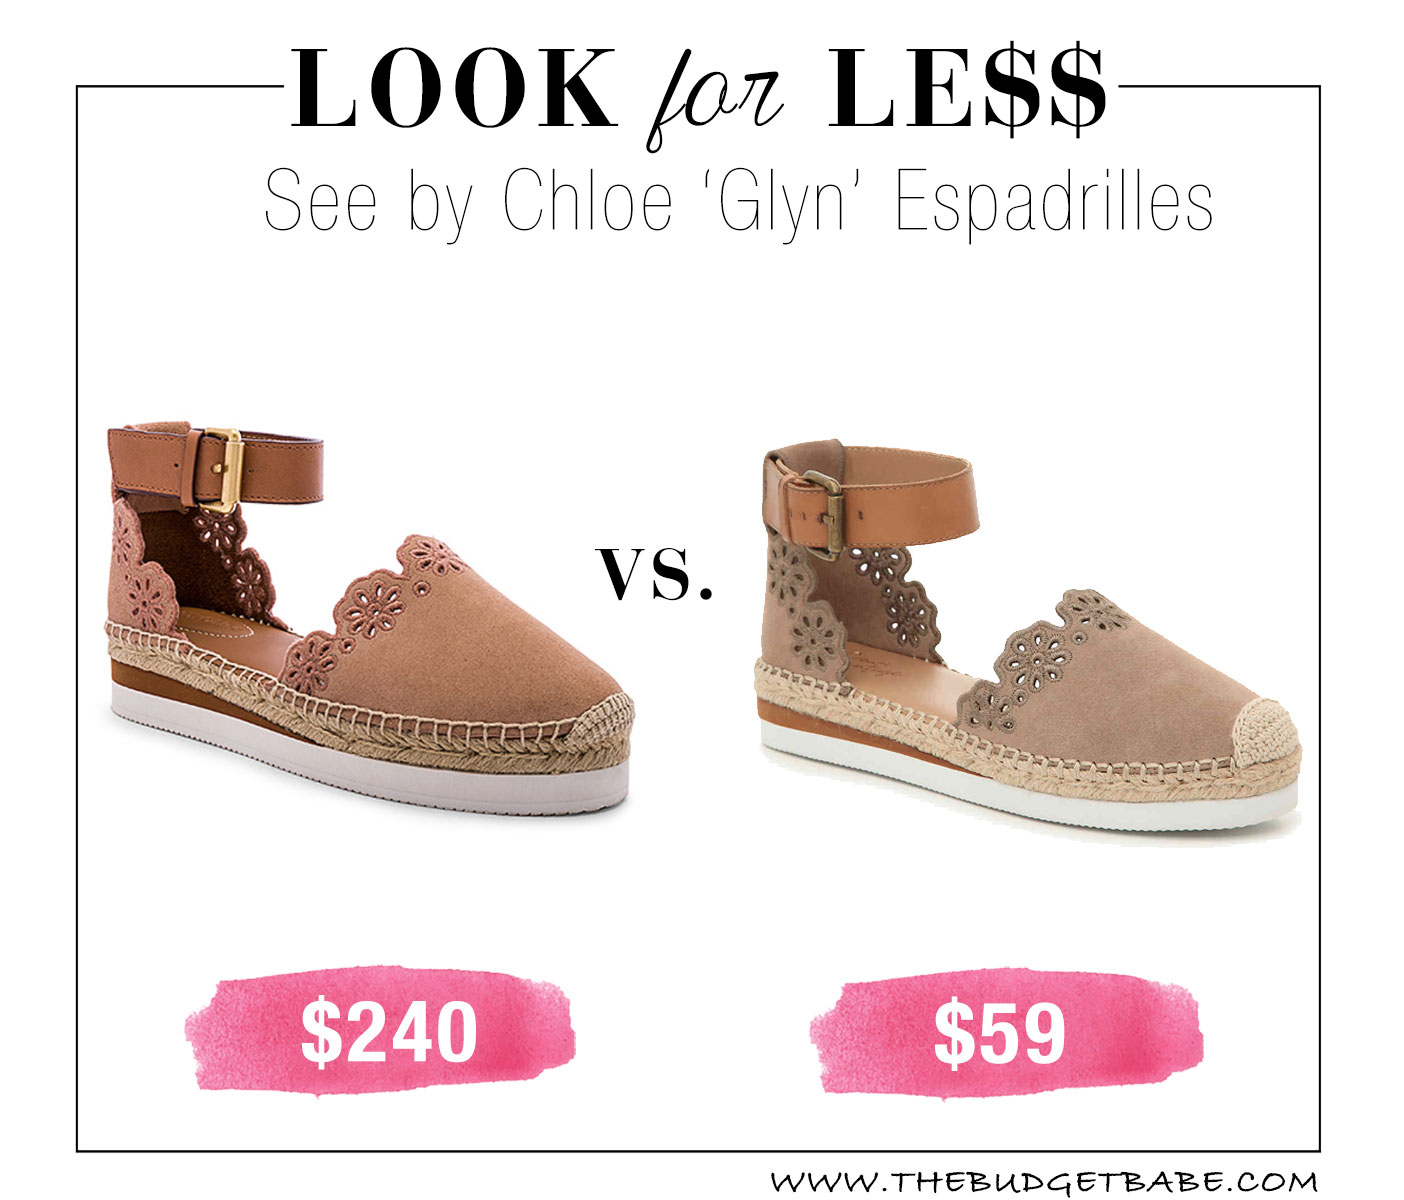 See by Chloe flower laser cut espadrille sandals look for less!